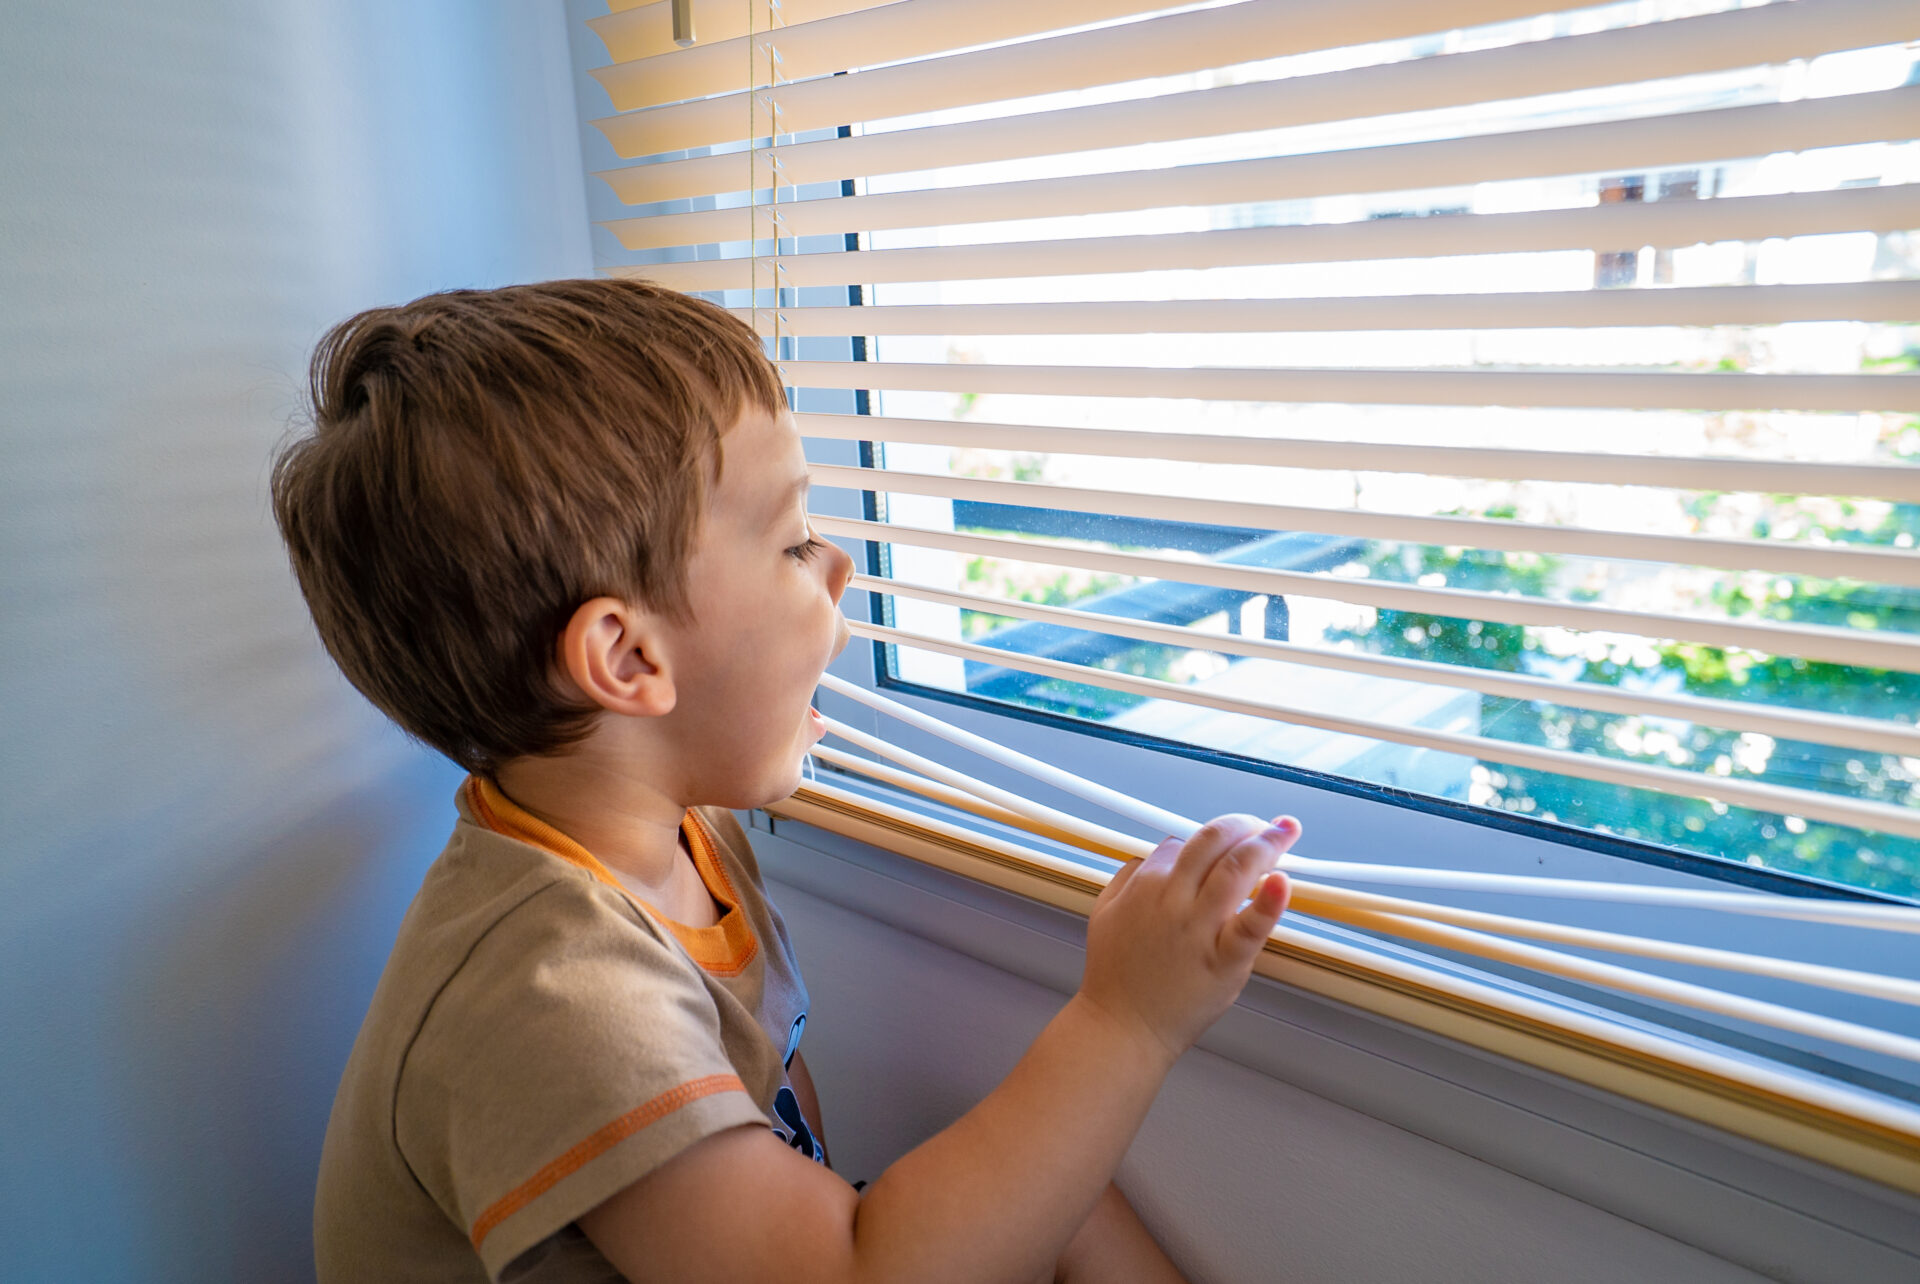 Boy looking through window blinds. Wholesale Blind Factory